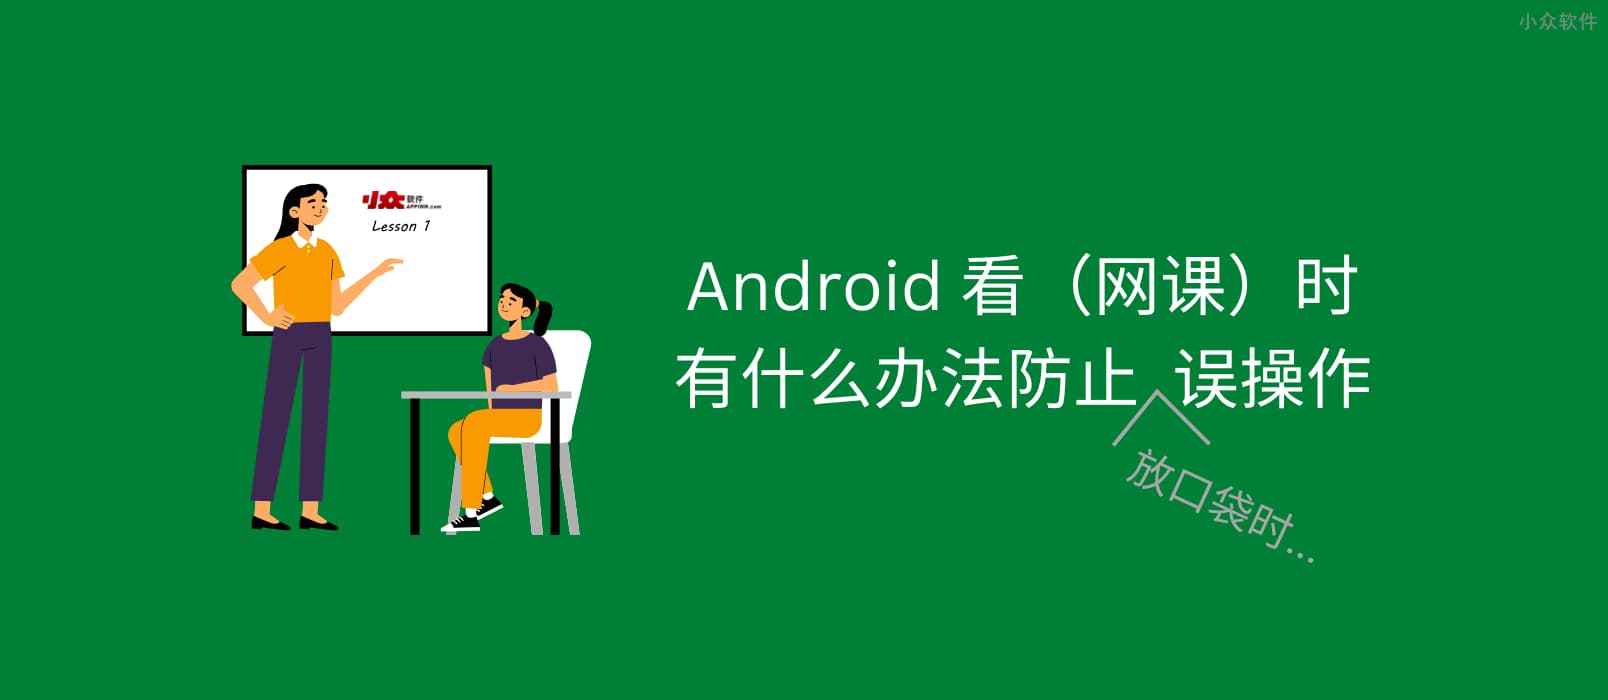 Android 上网课时，有什么办法防止放口袋里的误操作？